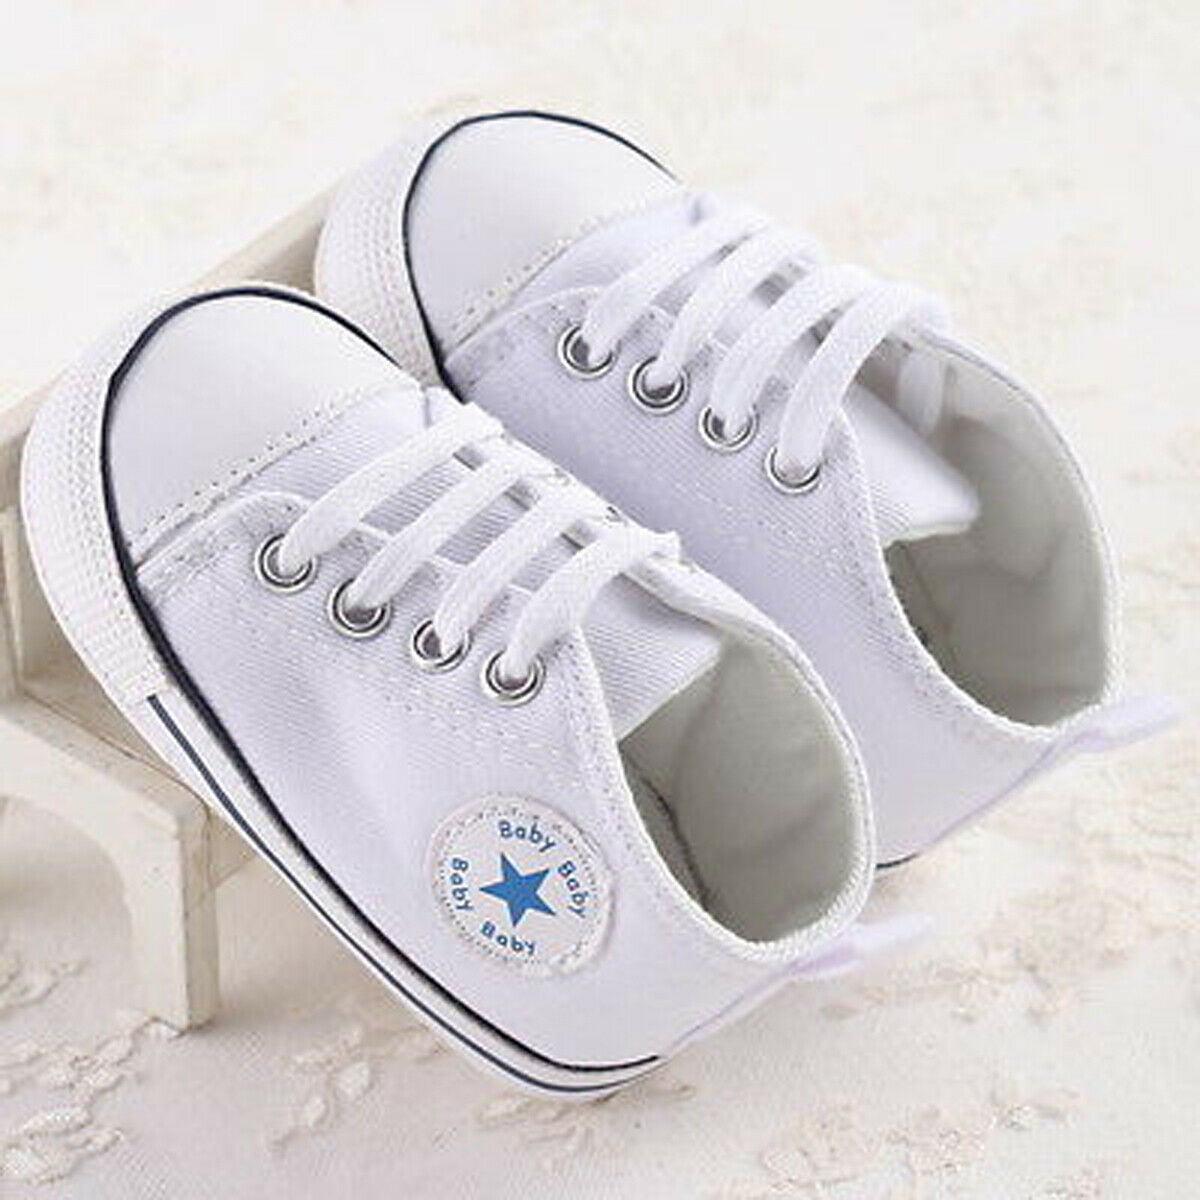 Toddler Infant Baby Boy Girl Soft Sole Crib Shoes Sneaker Newborn to 12 Months 